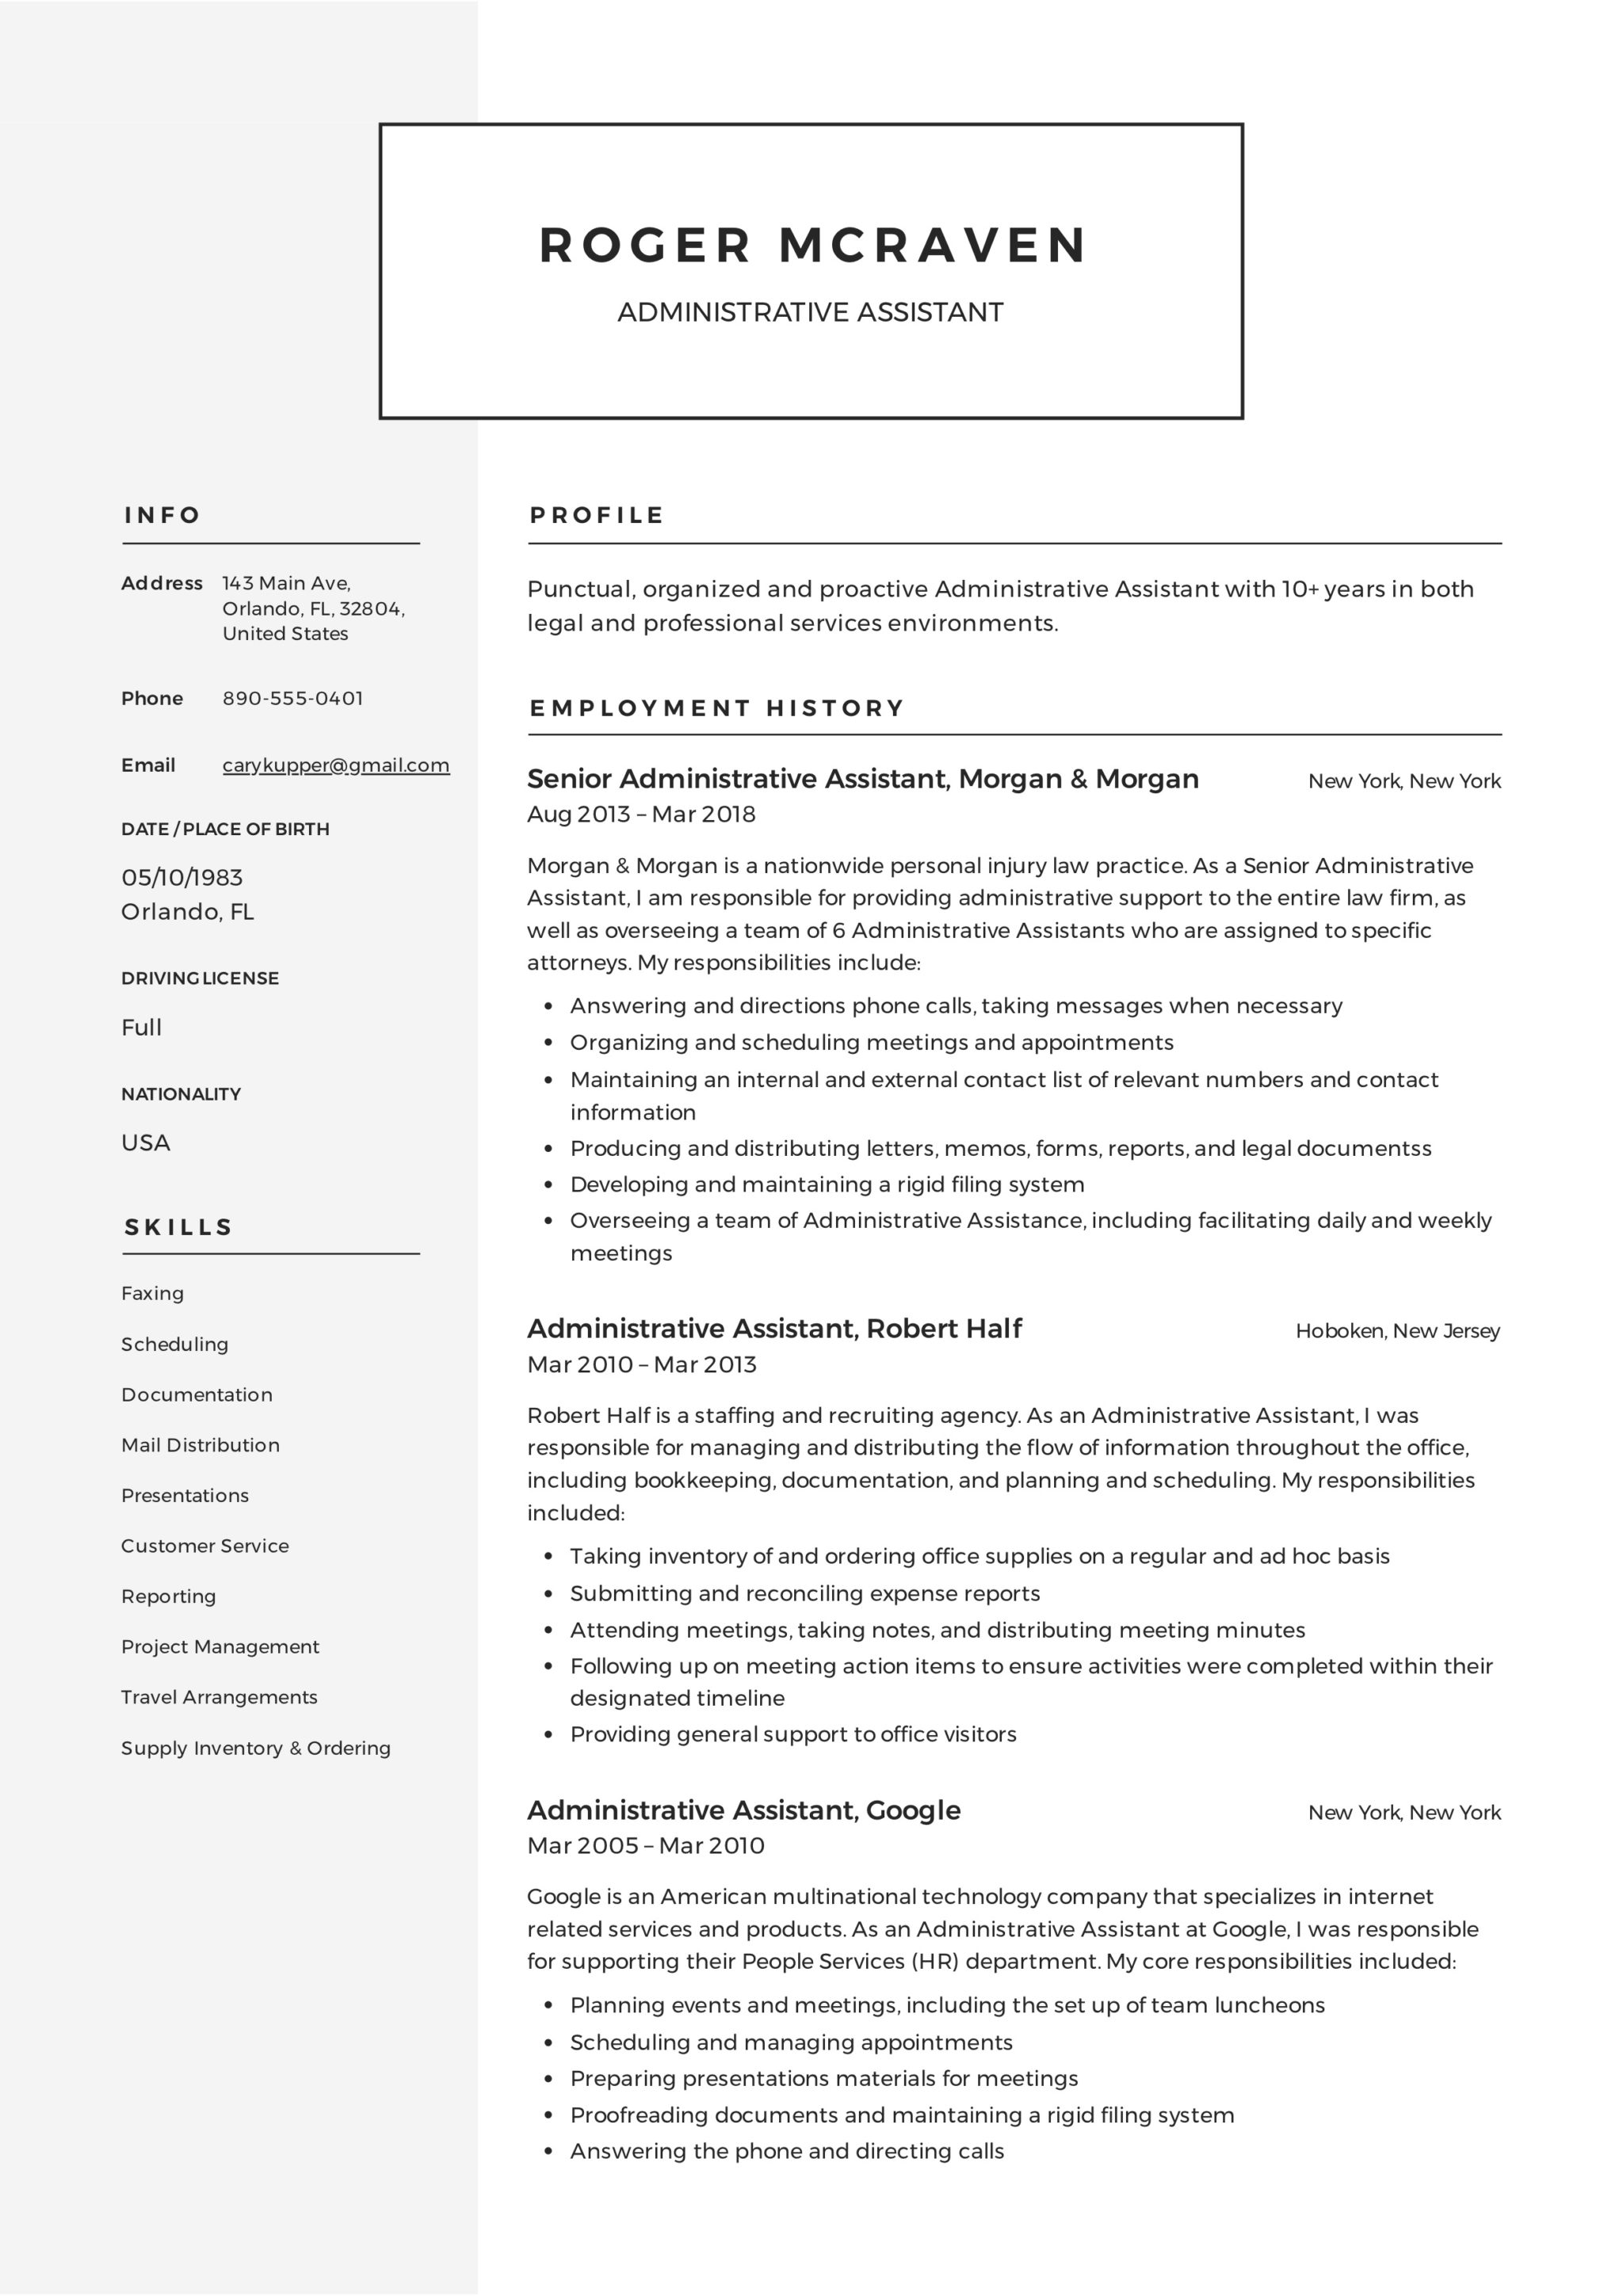 12 Administrative Assistant Resume Samples 2018 Free Downloads